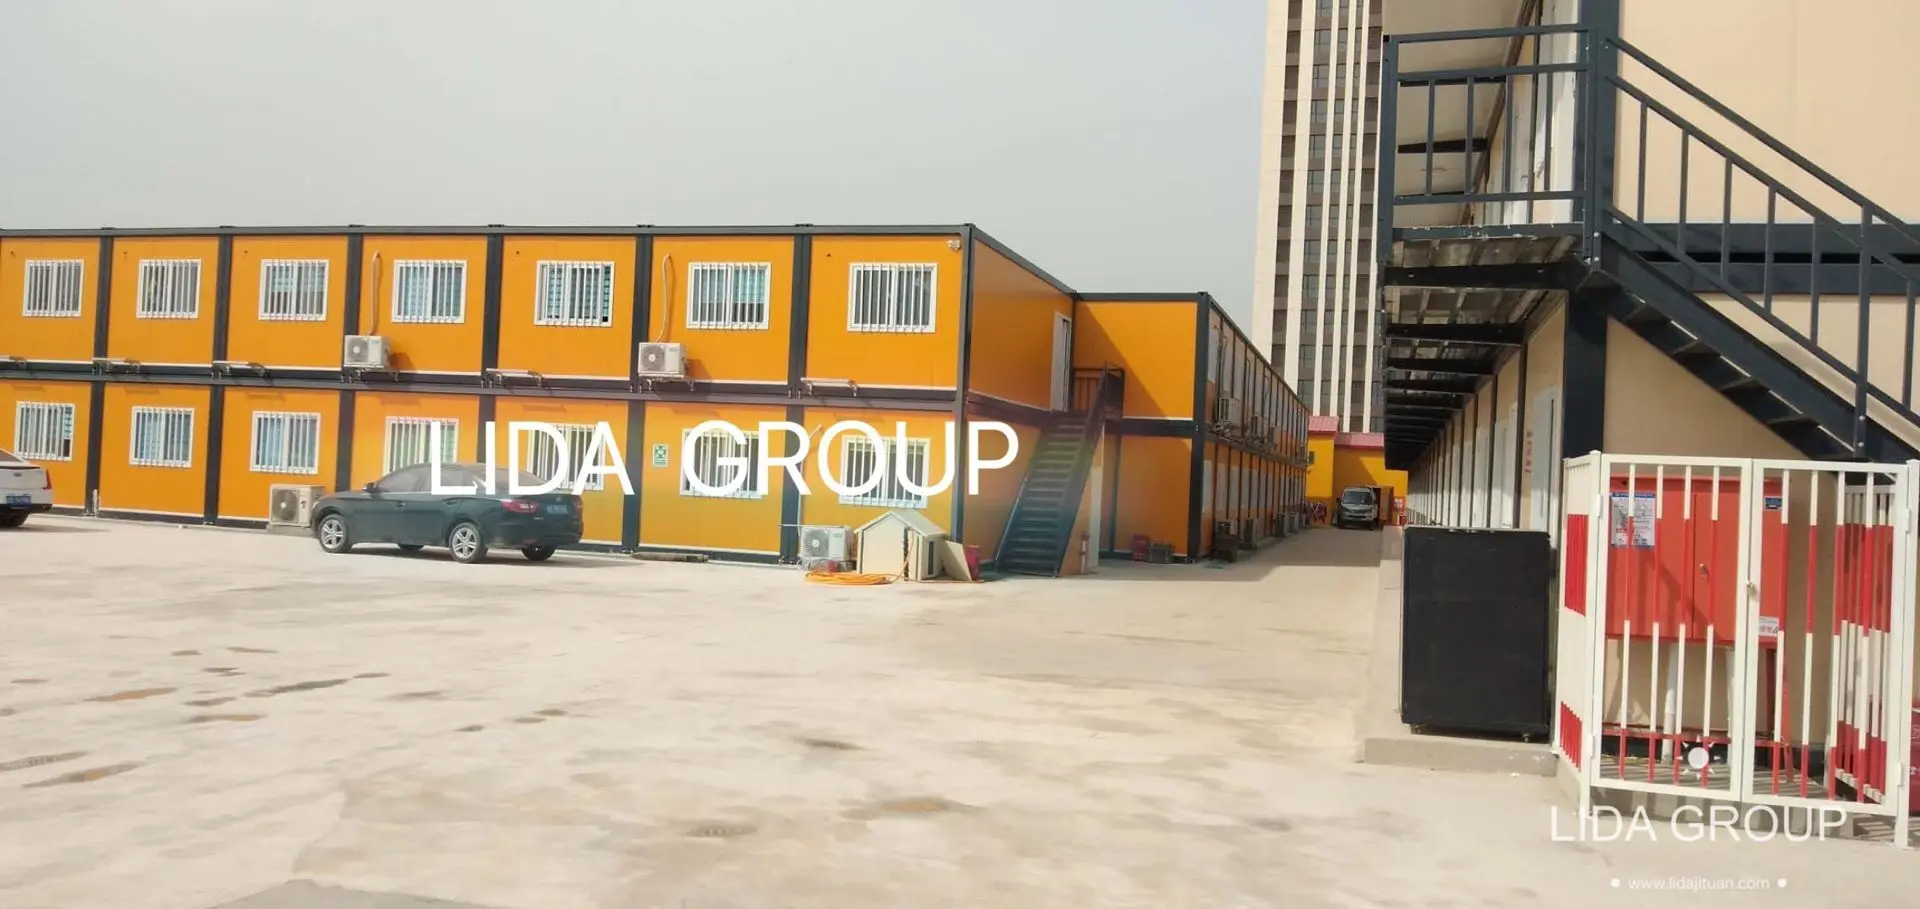 Lida Group Best prefab shipping container bulk buy used as booth, toilet, storage room-7